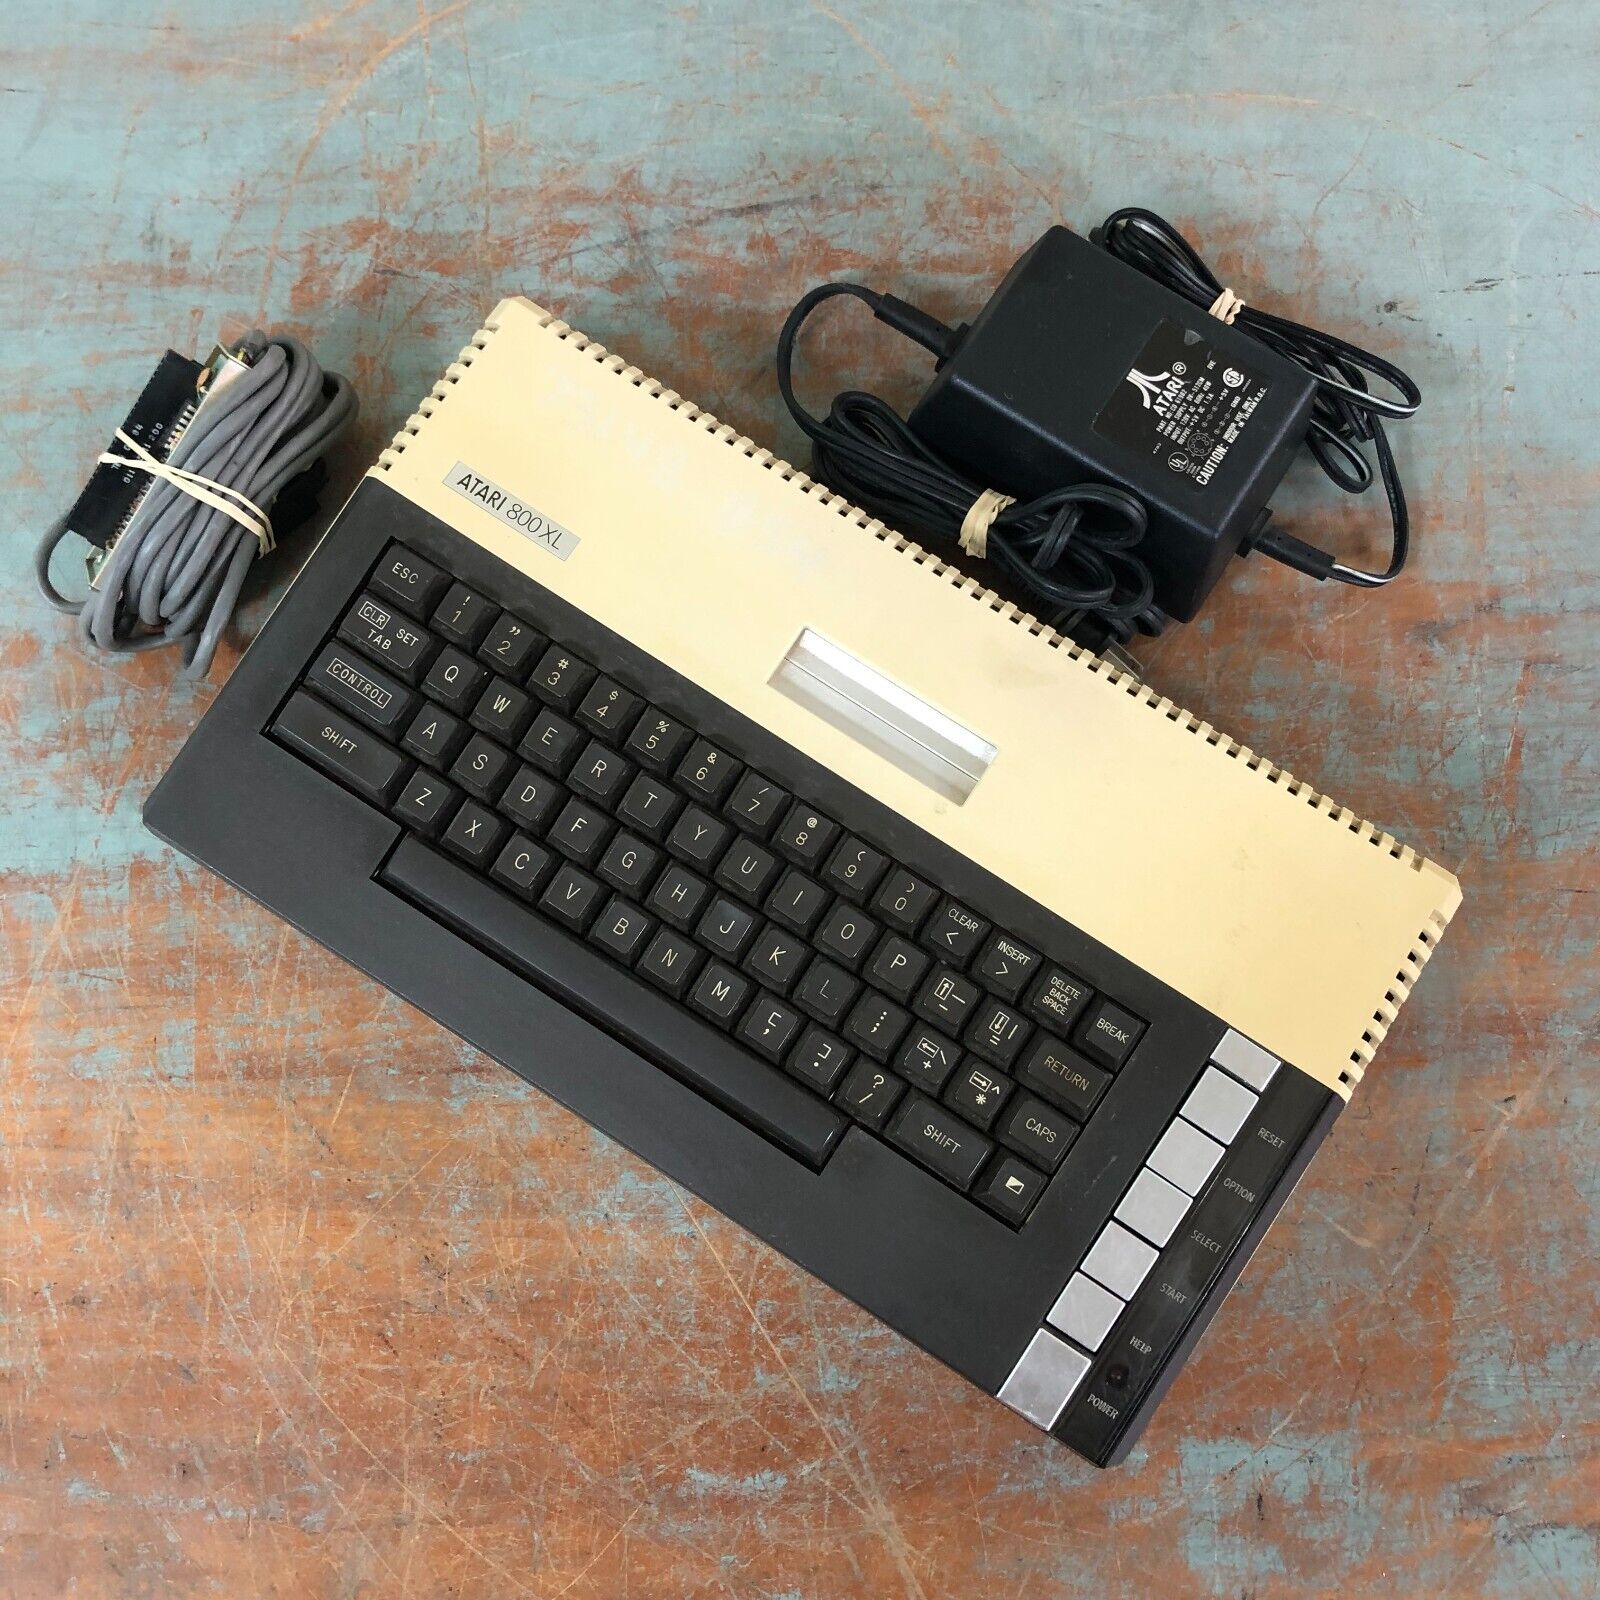 Atari 800XL Computer with Power Supply - WORKS